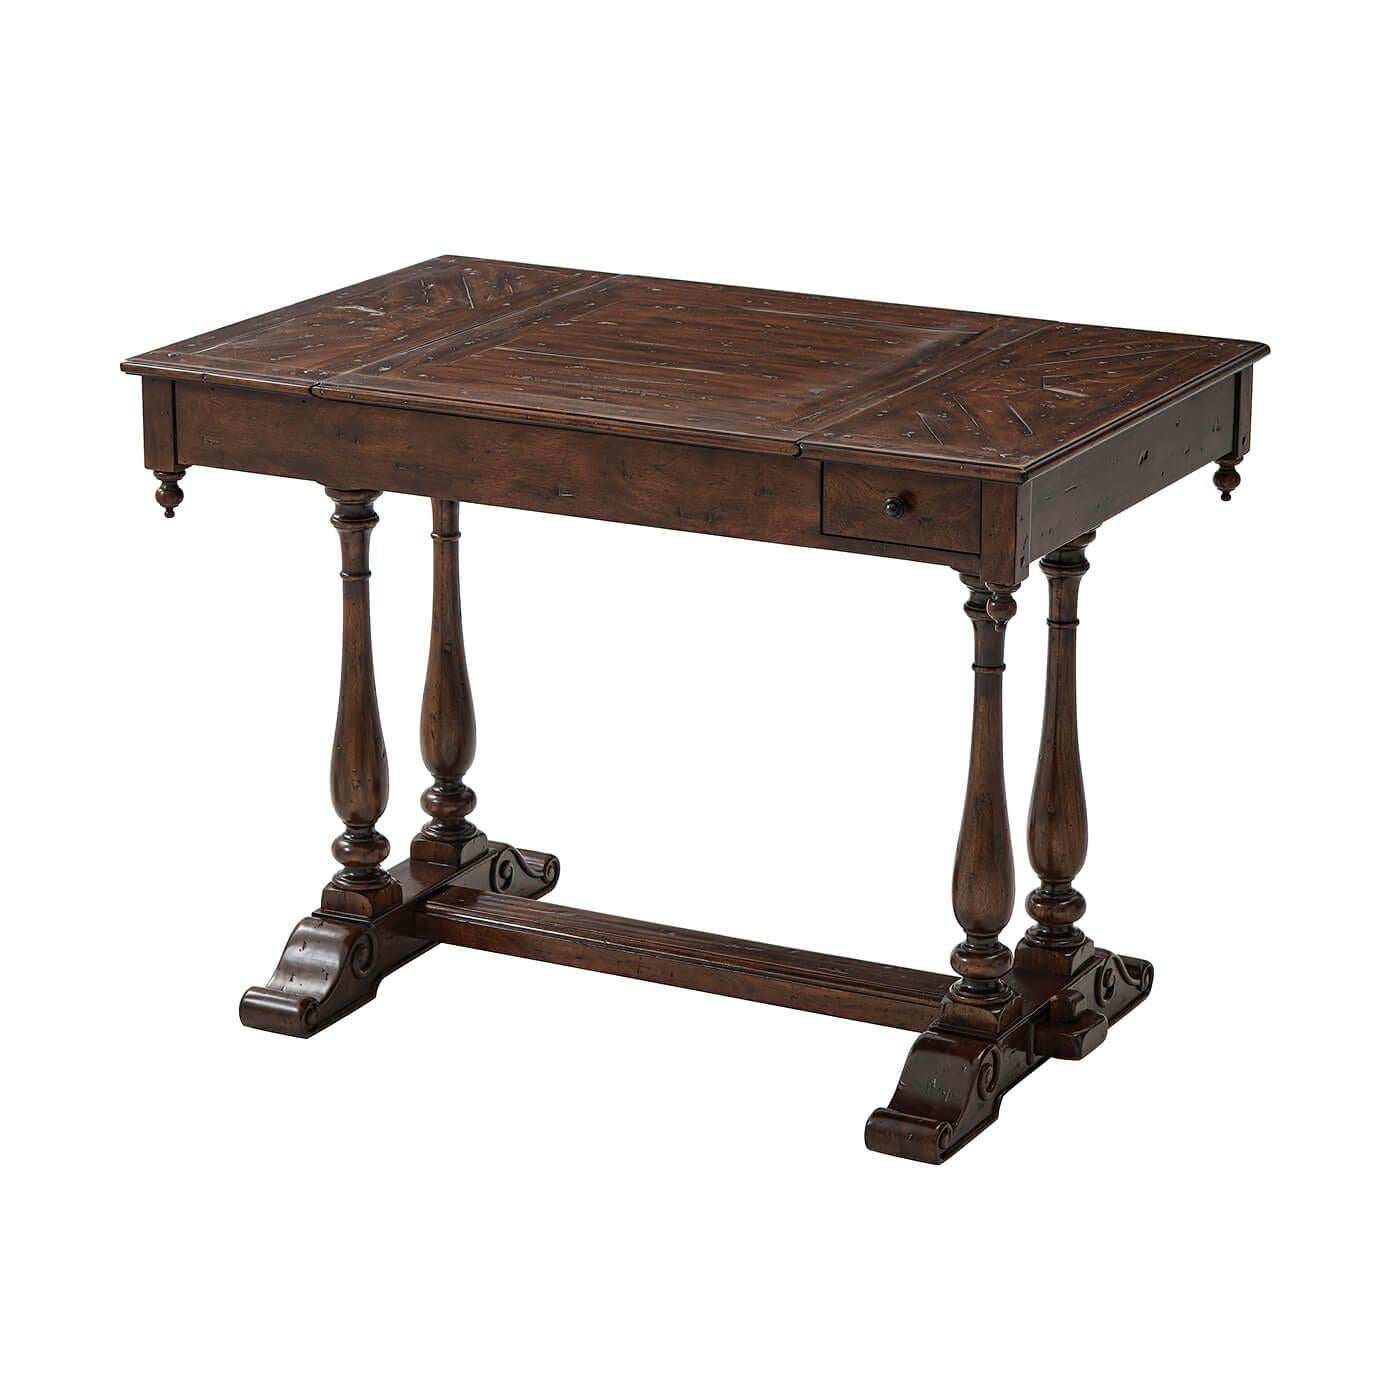 An antiqued wood games table, the rectangular top with a slide-out chessboard section revealing a backgammon board below, with two frieze drawers and turned finials, on twin turned baluster end supports, the base joined by a pegged stretcher. The